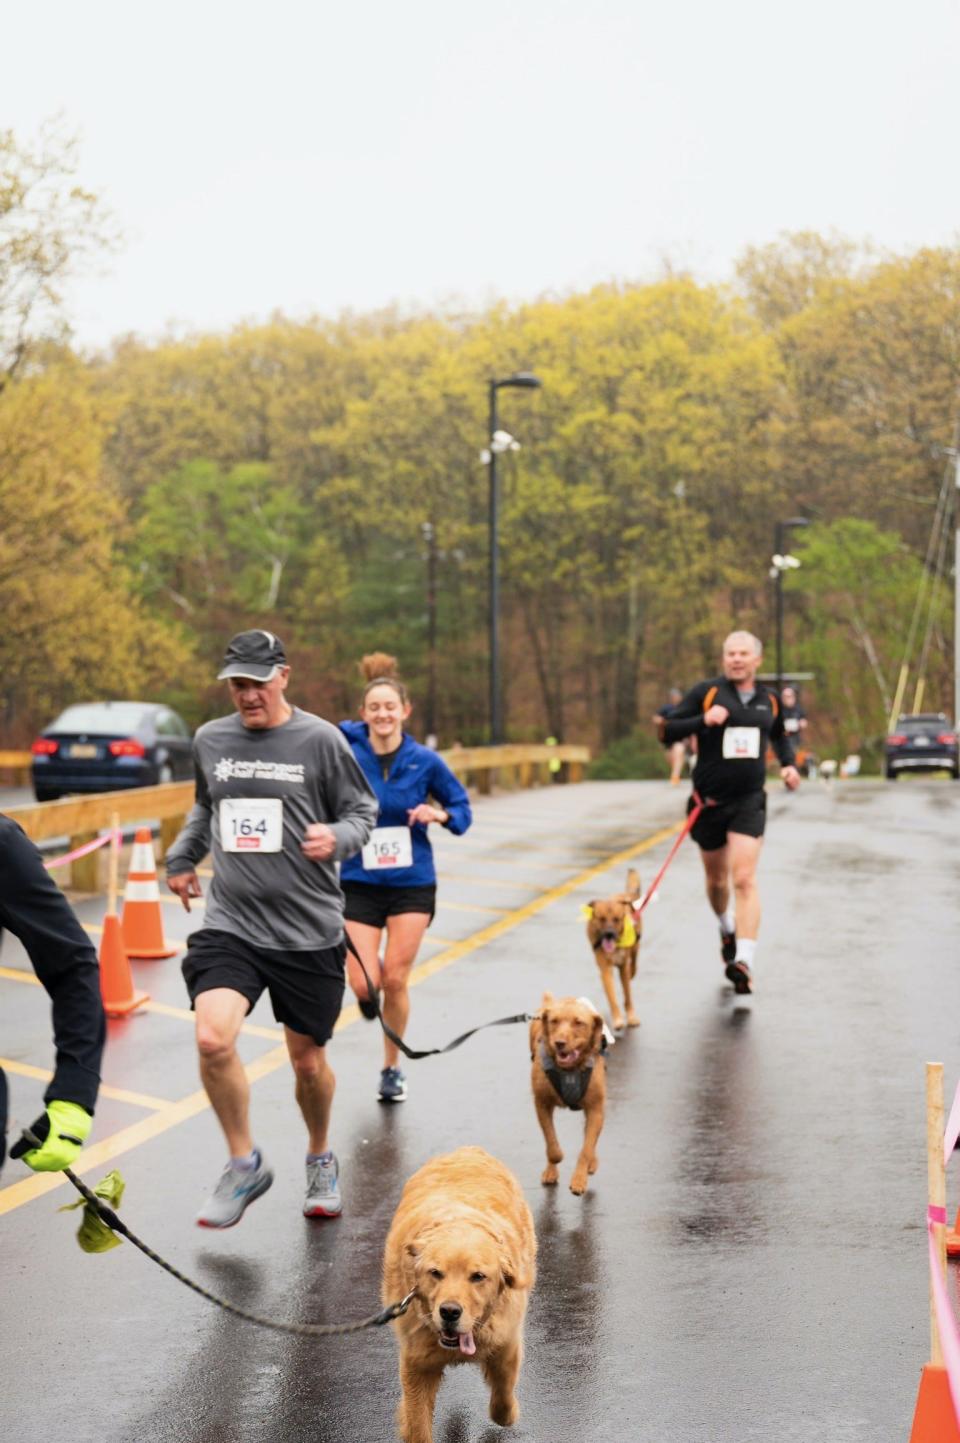 Runners, two-legged and four-legged alike, braved heavy rain during the JR's Paws for a Cause 5K last year in Natick.